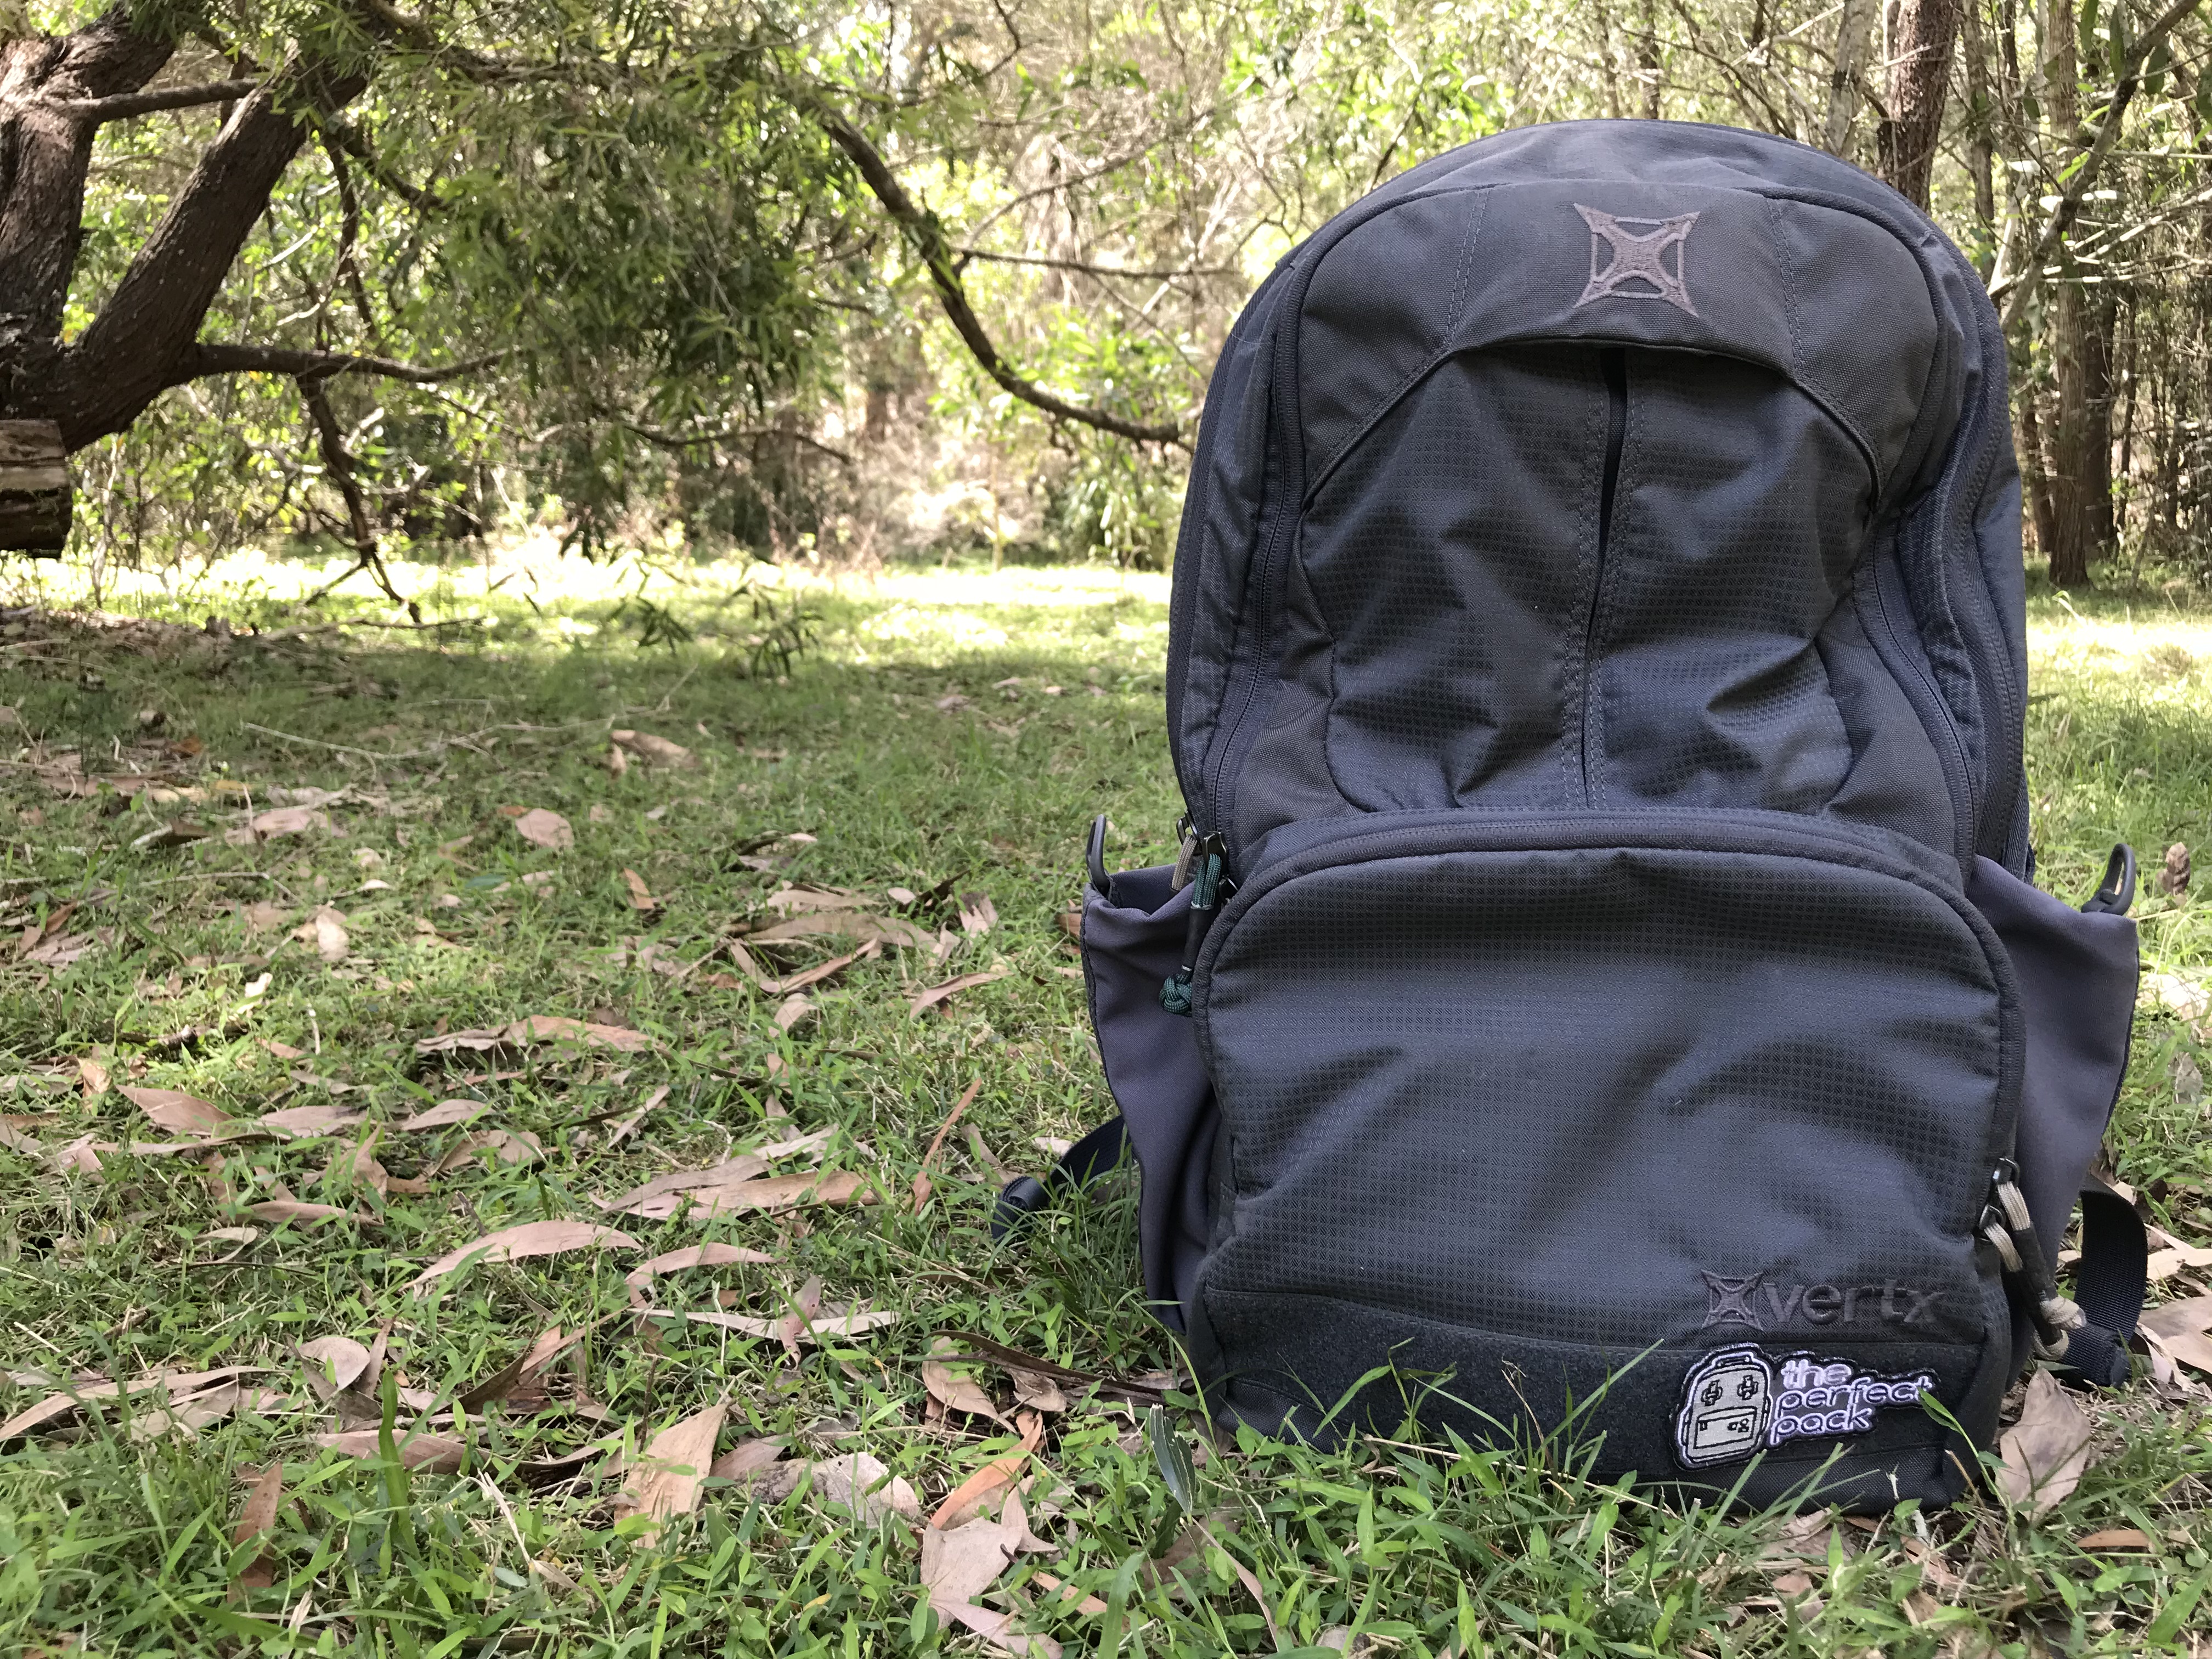 Vertx EDC Ready Pack Review Front